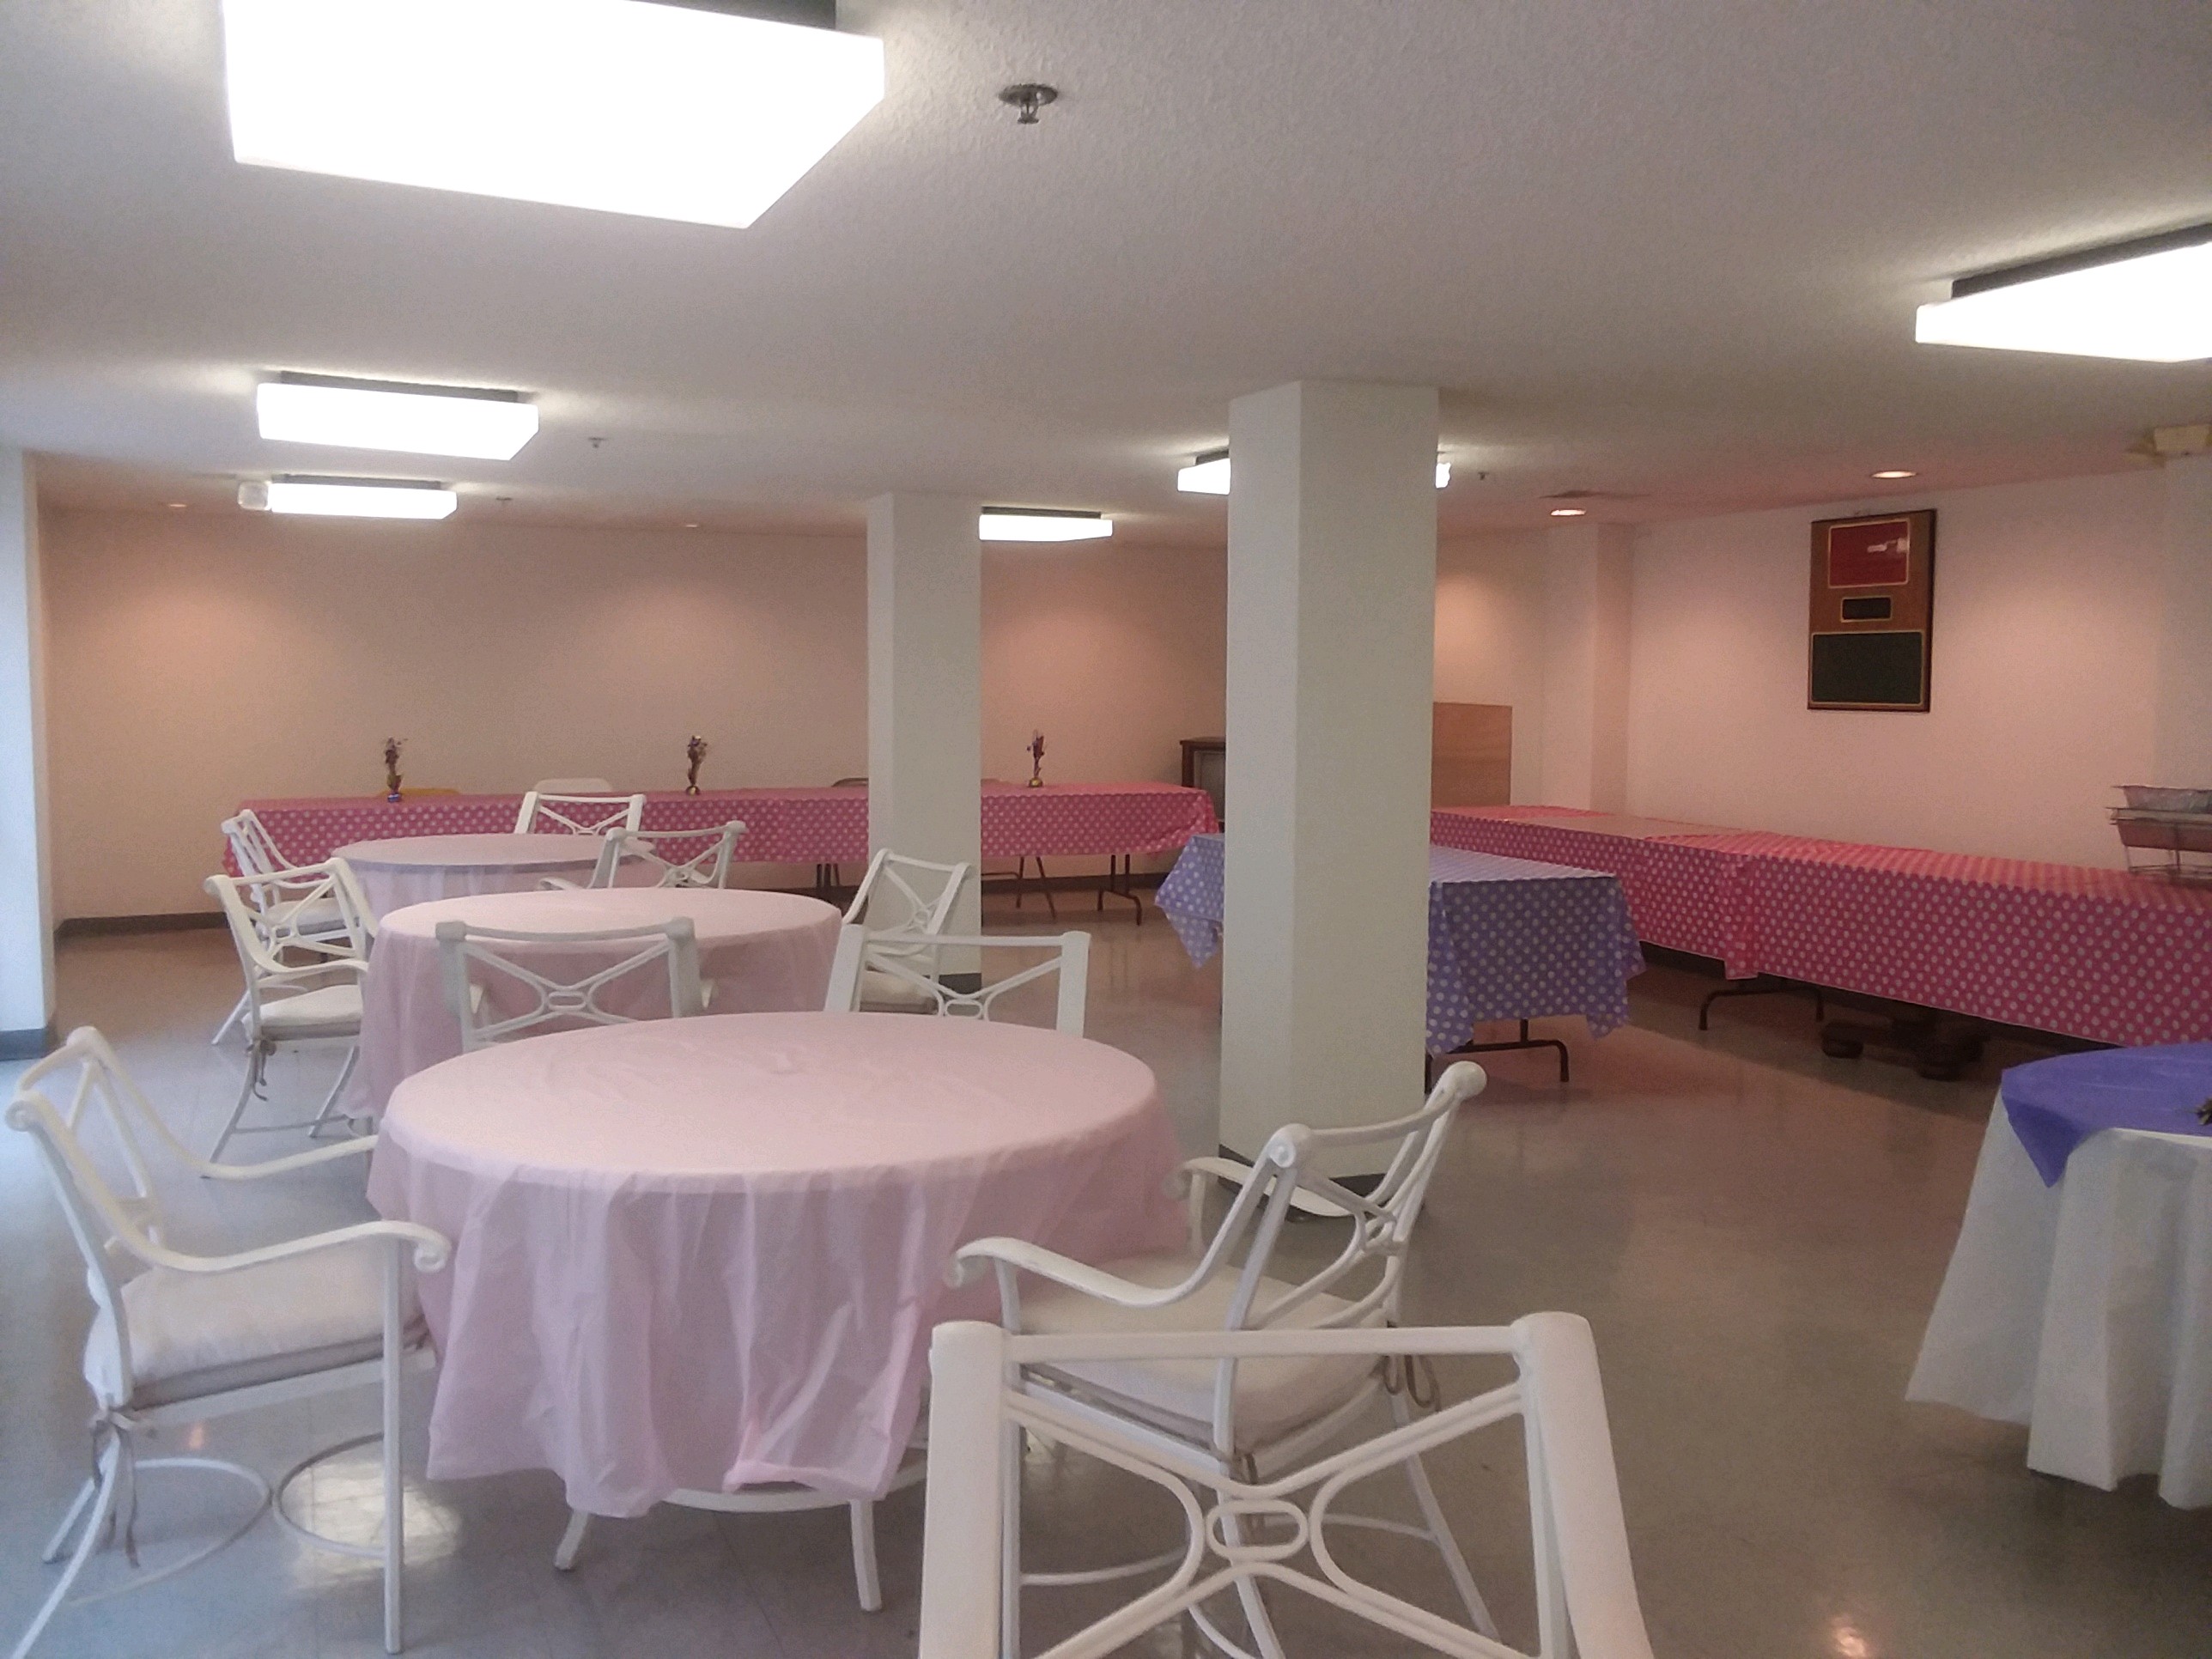 Interior view of a community room at Fame Manor. Round tables and chairs with retangular tables along the walls